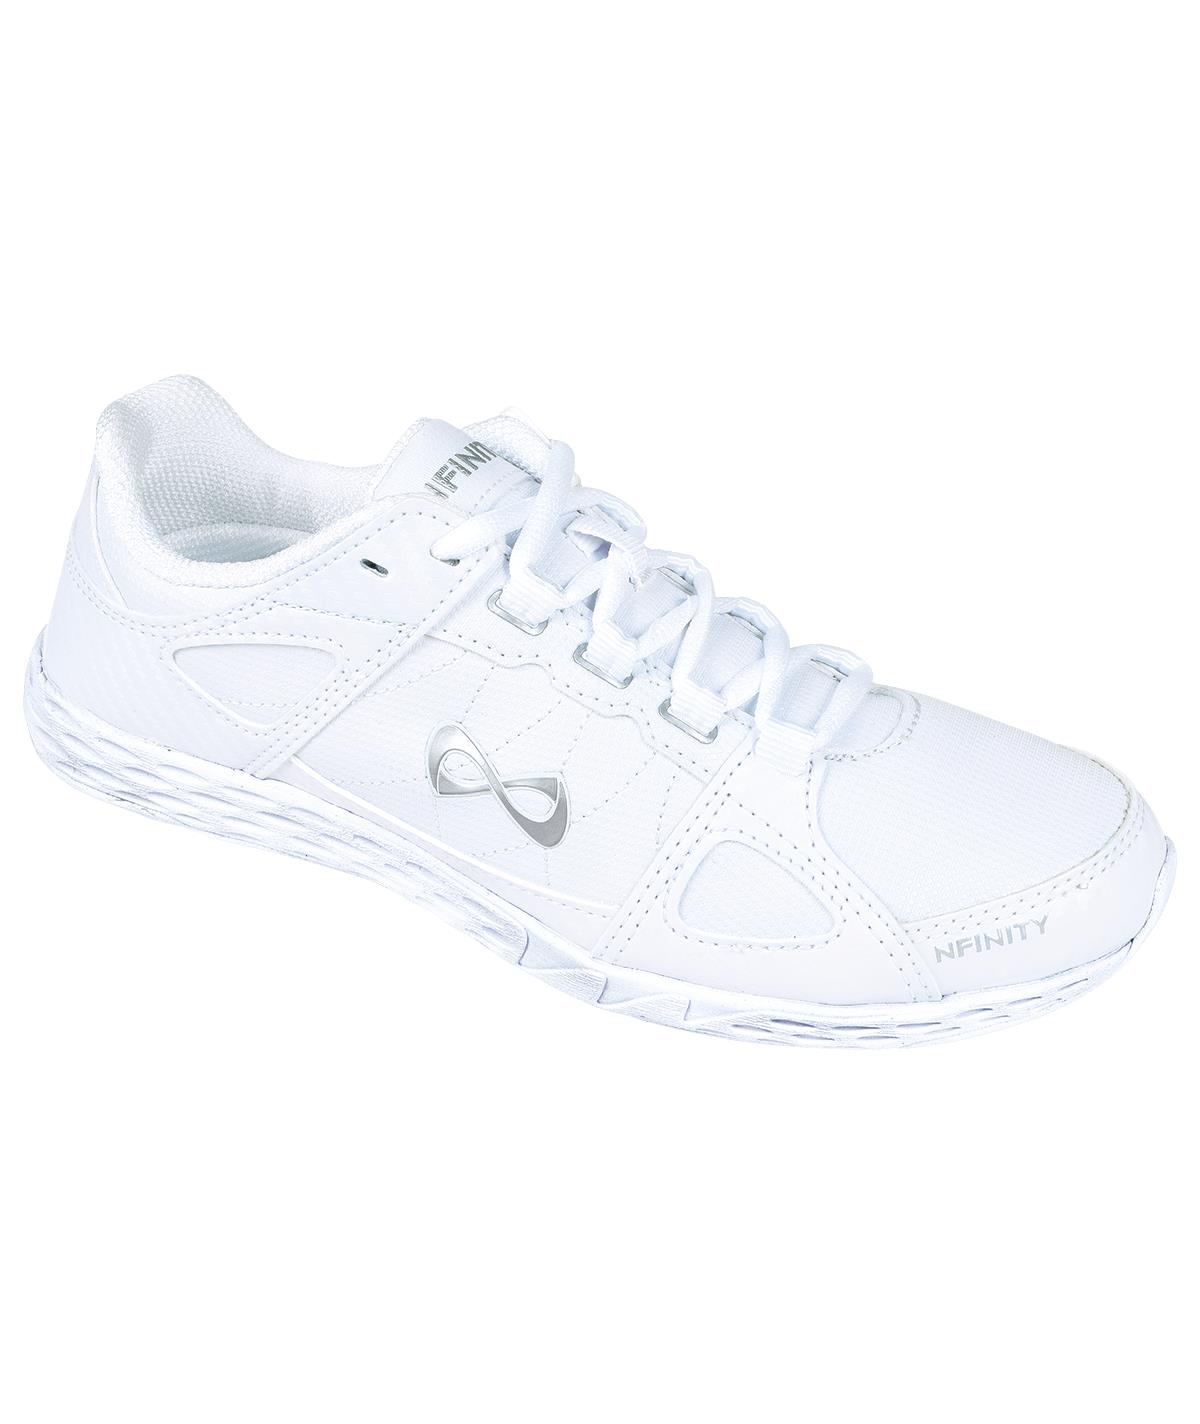 sideline cheer shoes